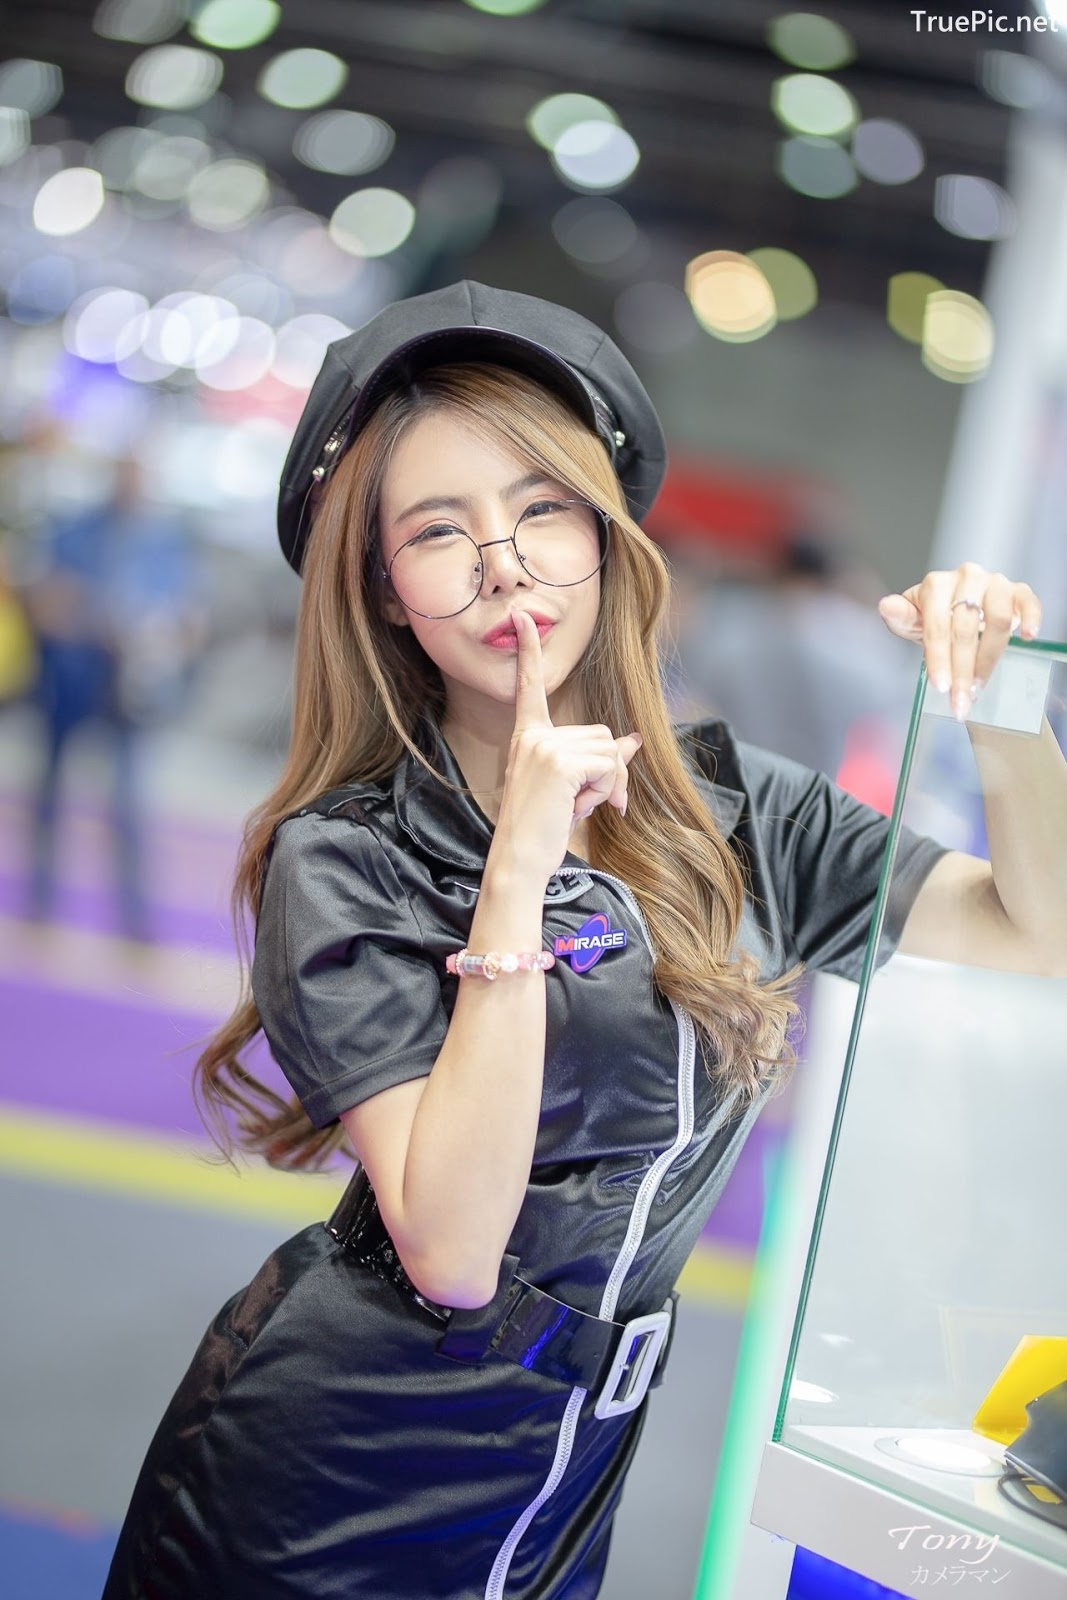 Image-Thailand-Hot-Model-Thai-Racing-Girl-At-Motor-Expo-2019-TruePic.net- Picture-132